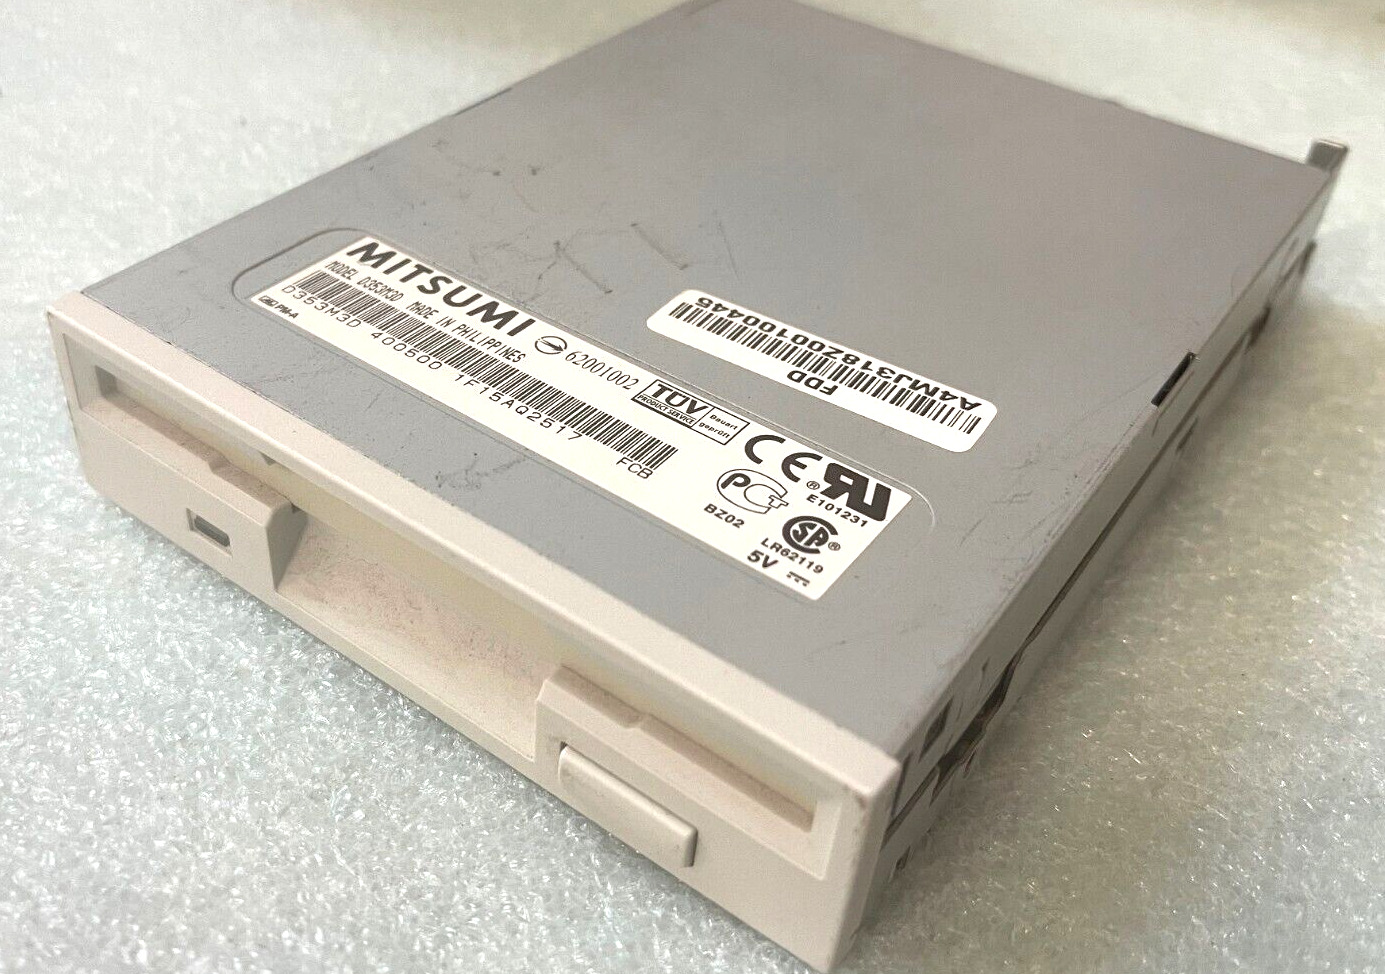 TESTED PULLS MITSUMI D353M3D 1.44MB FLOPPY DISK DRIVE FULL FRONT FACEPLATE BXDR3